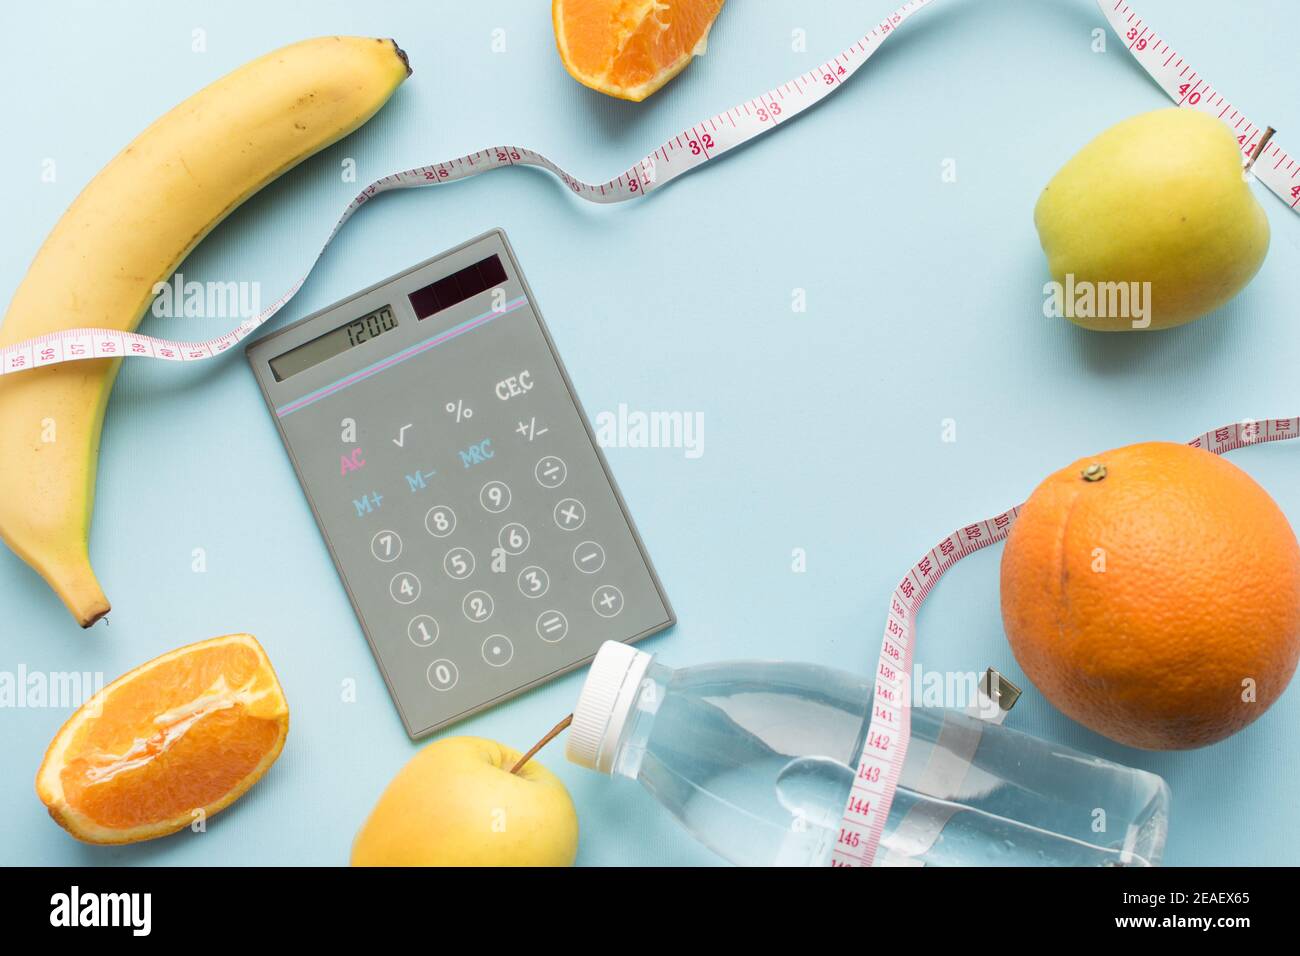 Calculator with numbers 1200, bottle of water, measuring tape and fruits on  blue background. Healthy eating concept - calculate daily nutrition intake  Stock Photo - Alamy